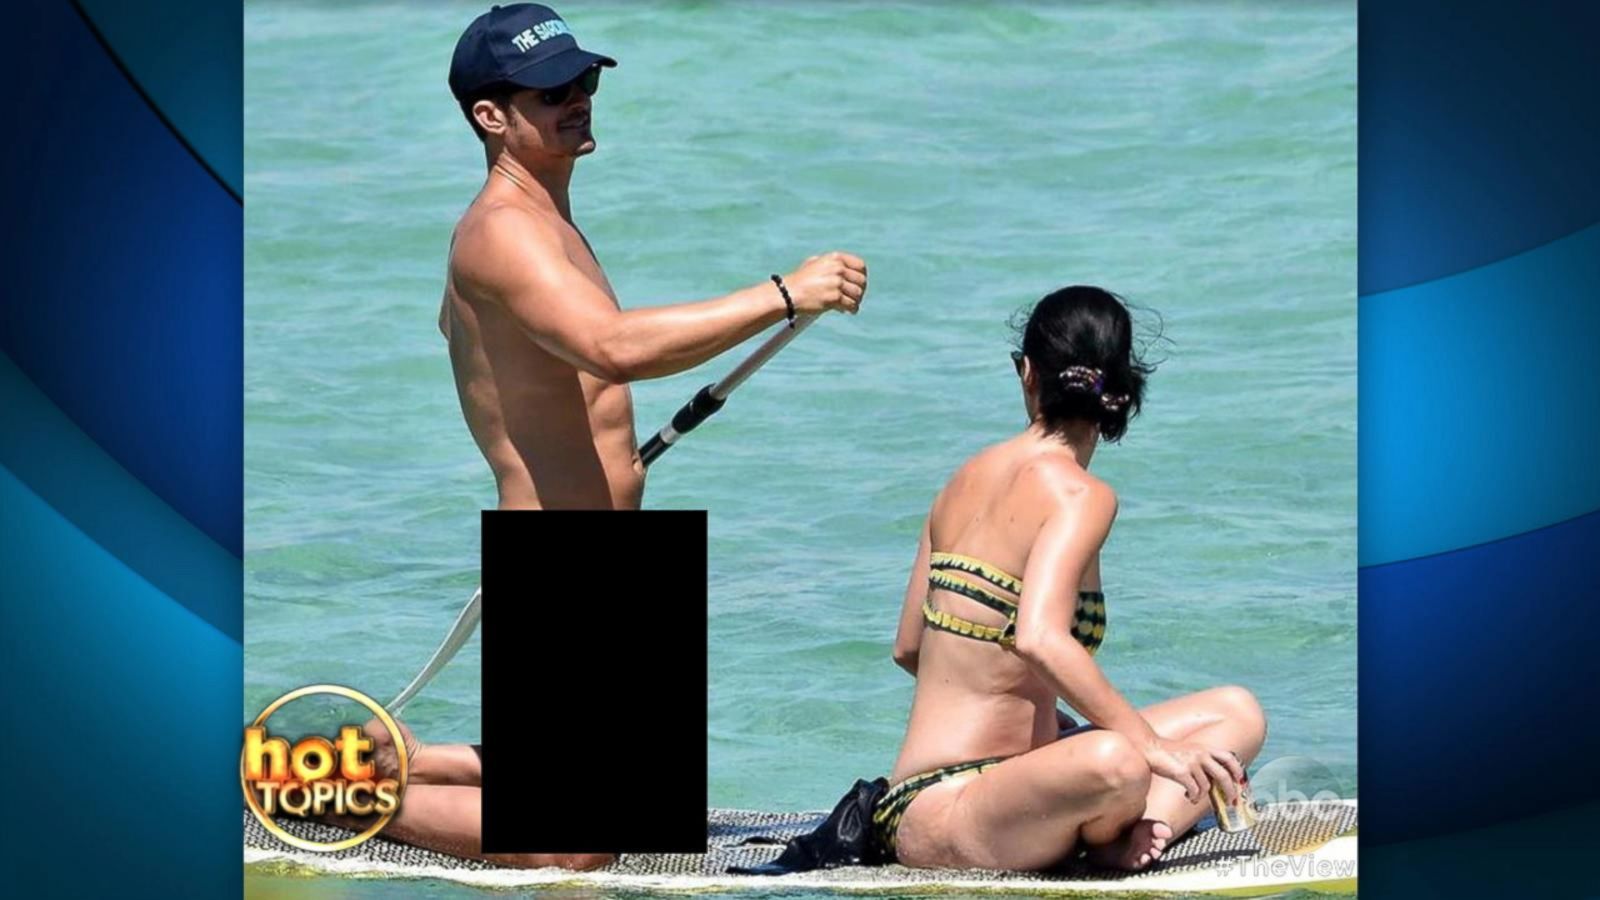 Orlando Bloom Caught Paddle Boarding Naked With Katy Perry Good Morning America